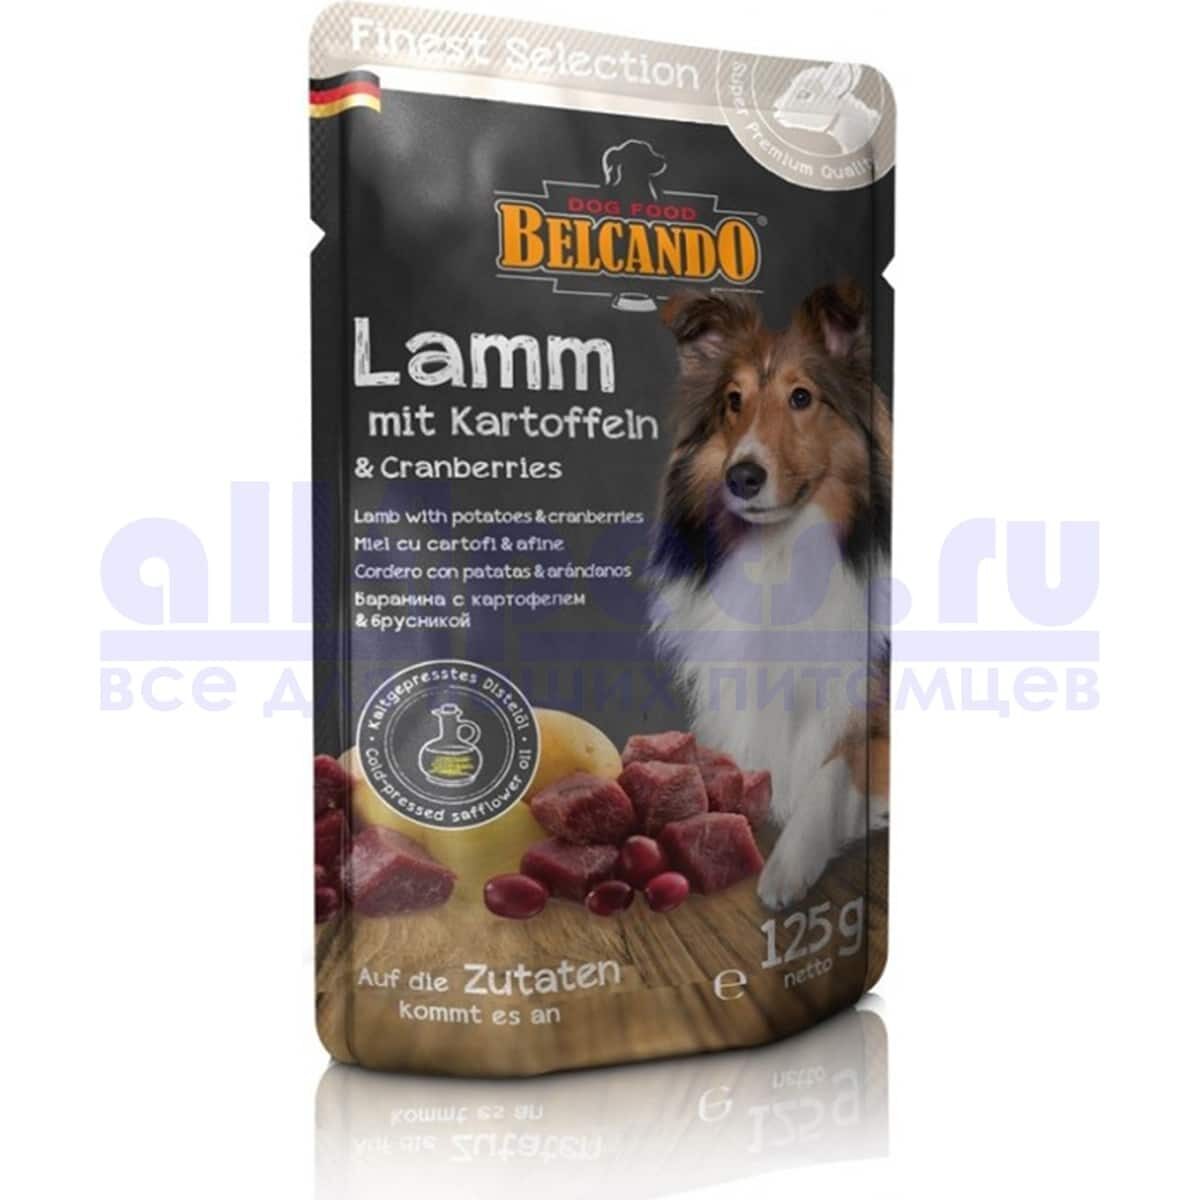 Belcando Finest Selection Lamb With Potatoes and Cranberries